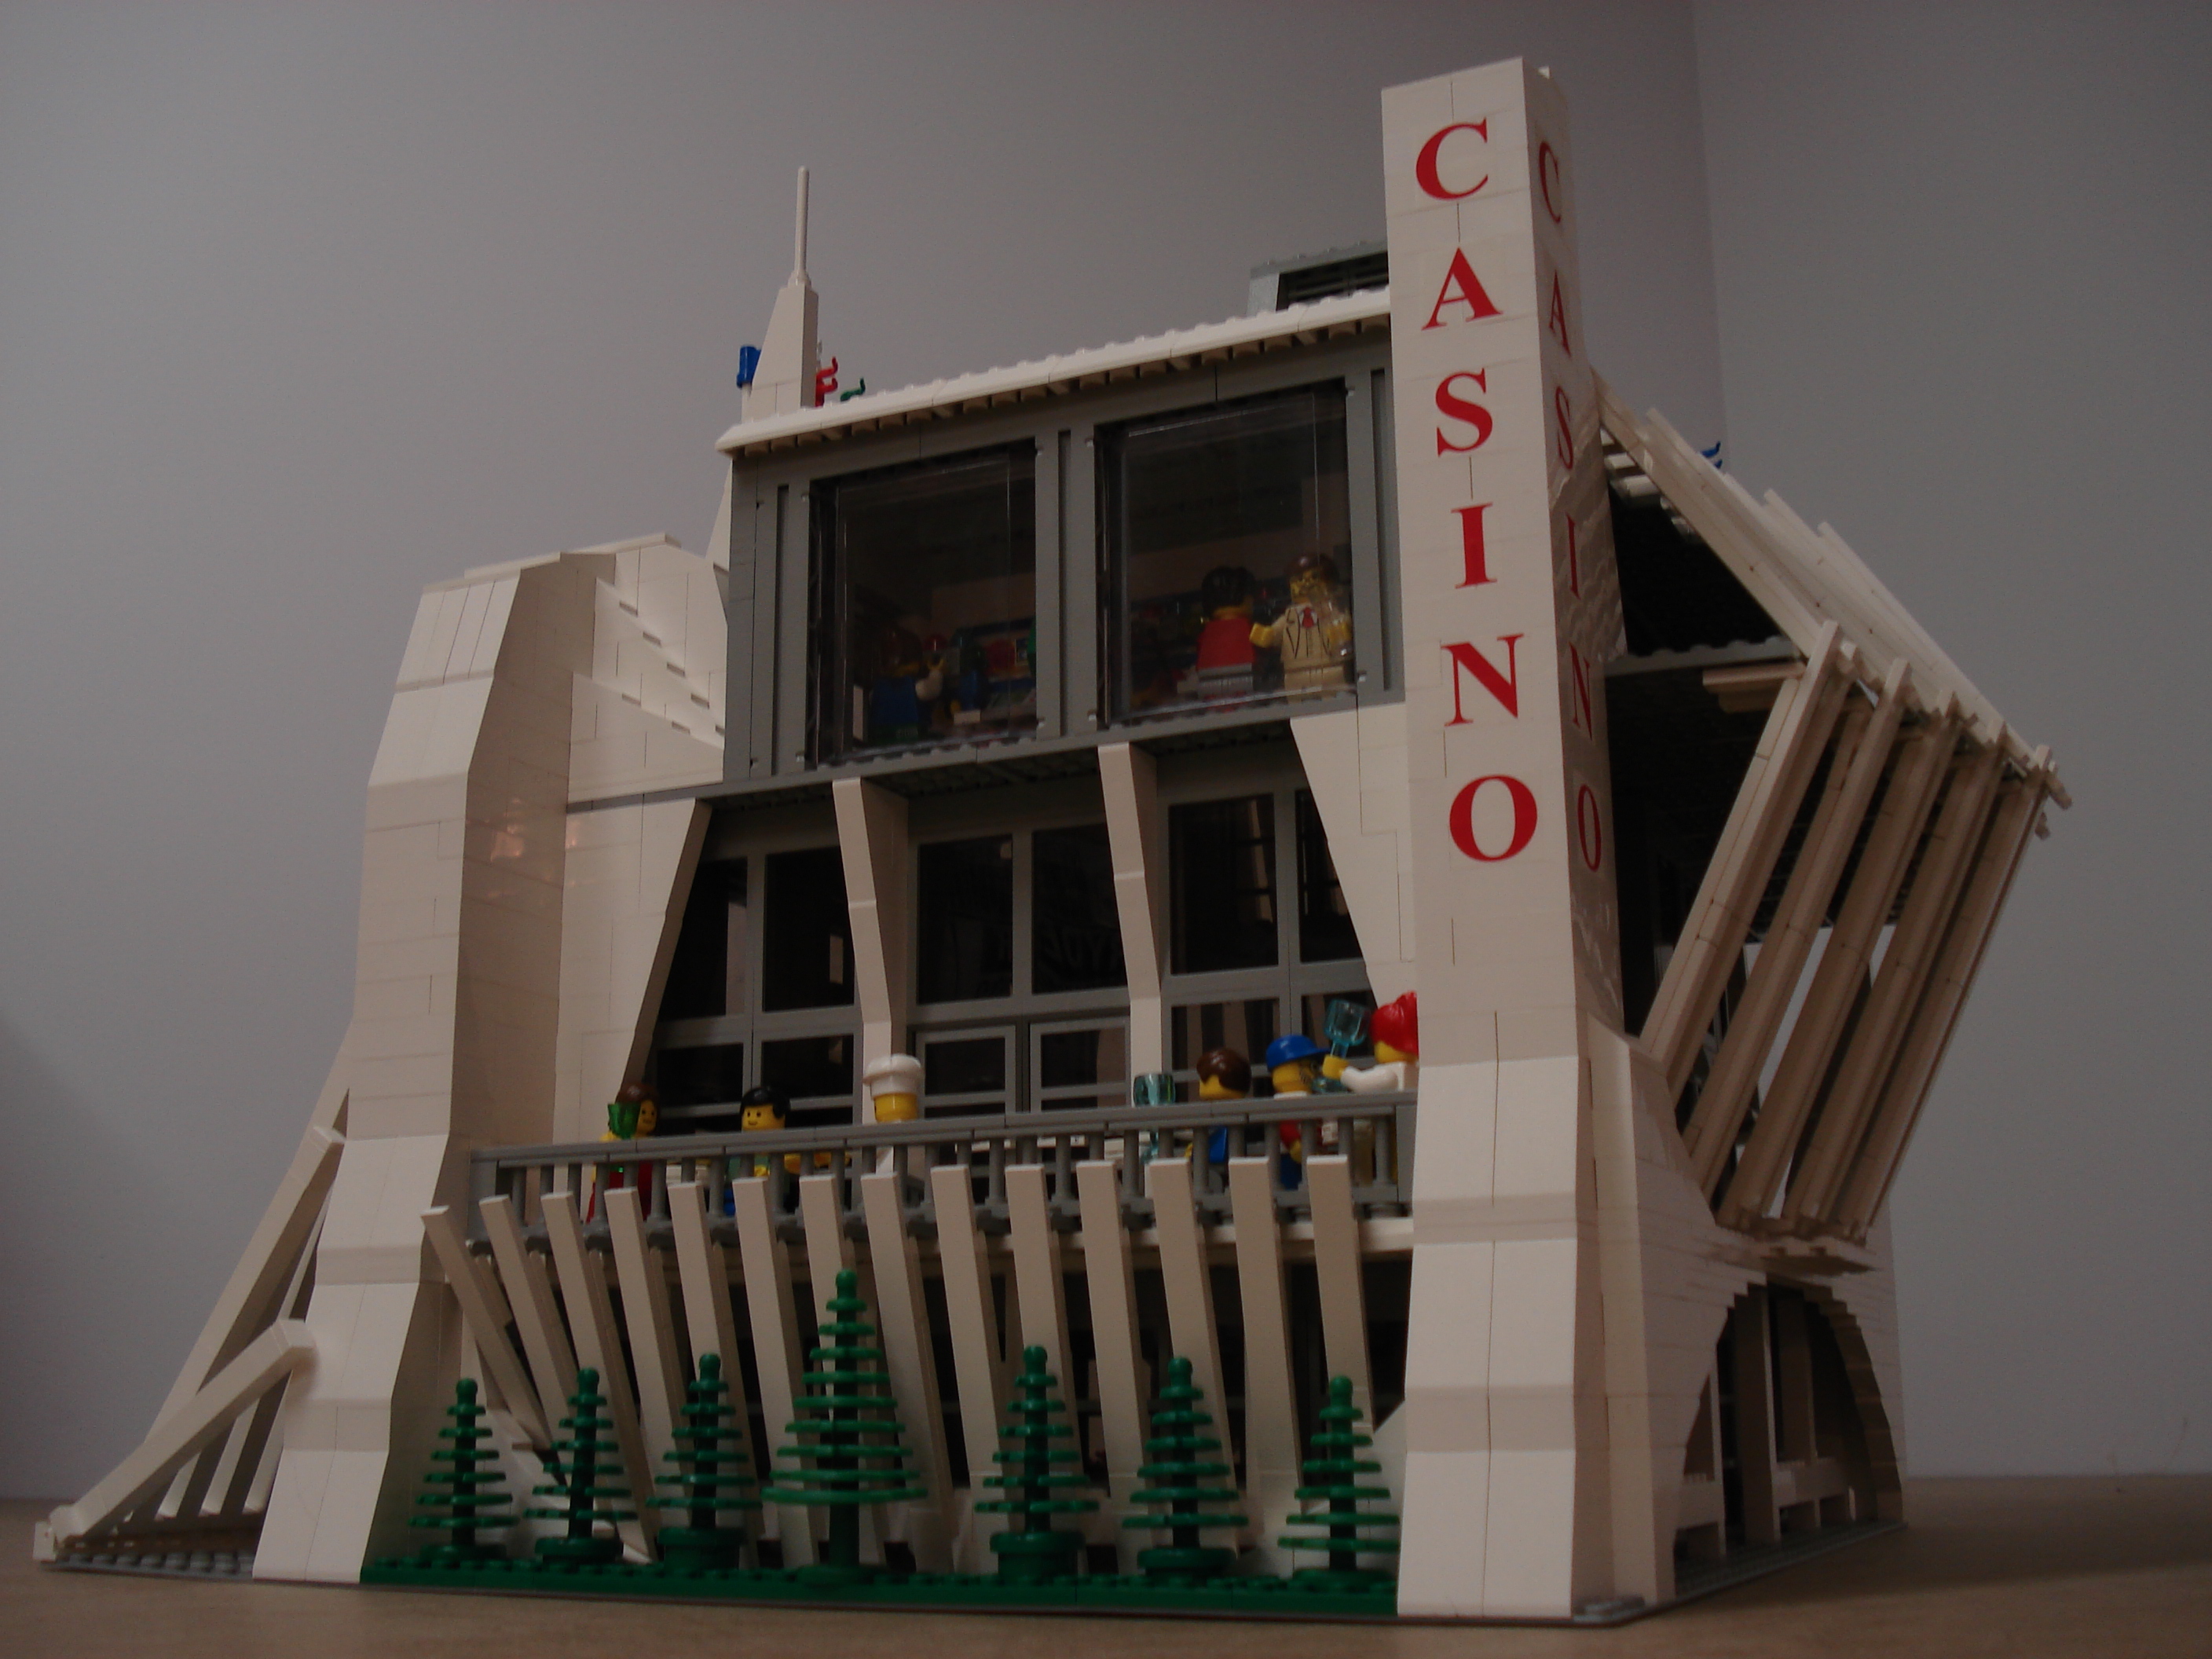 Casino with angled walls